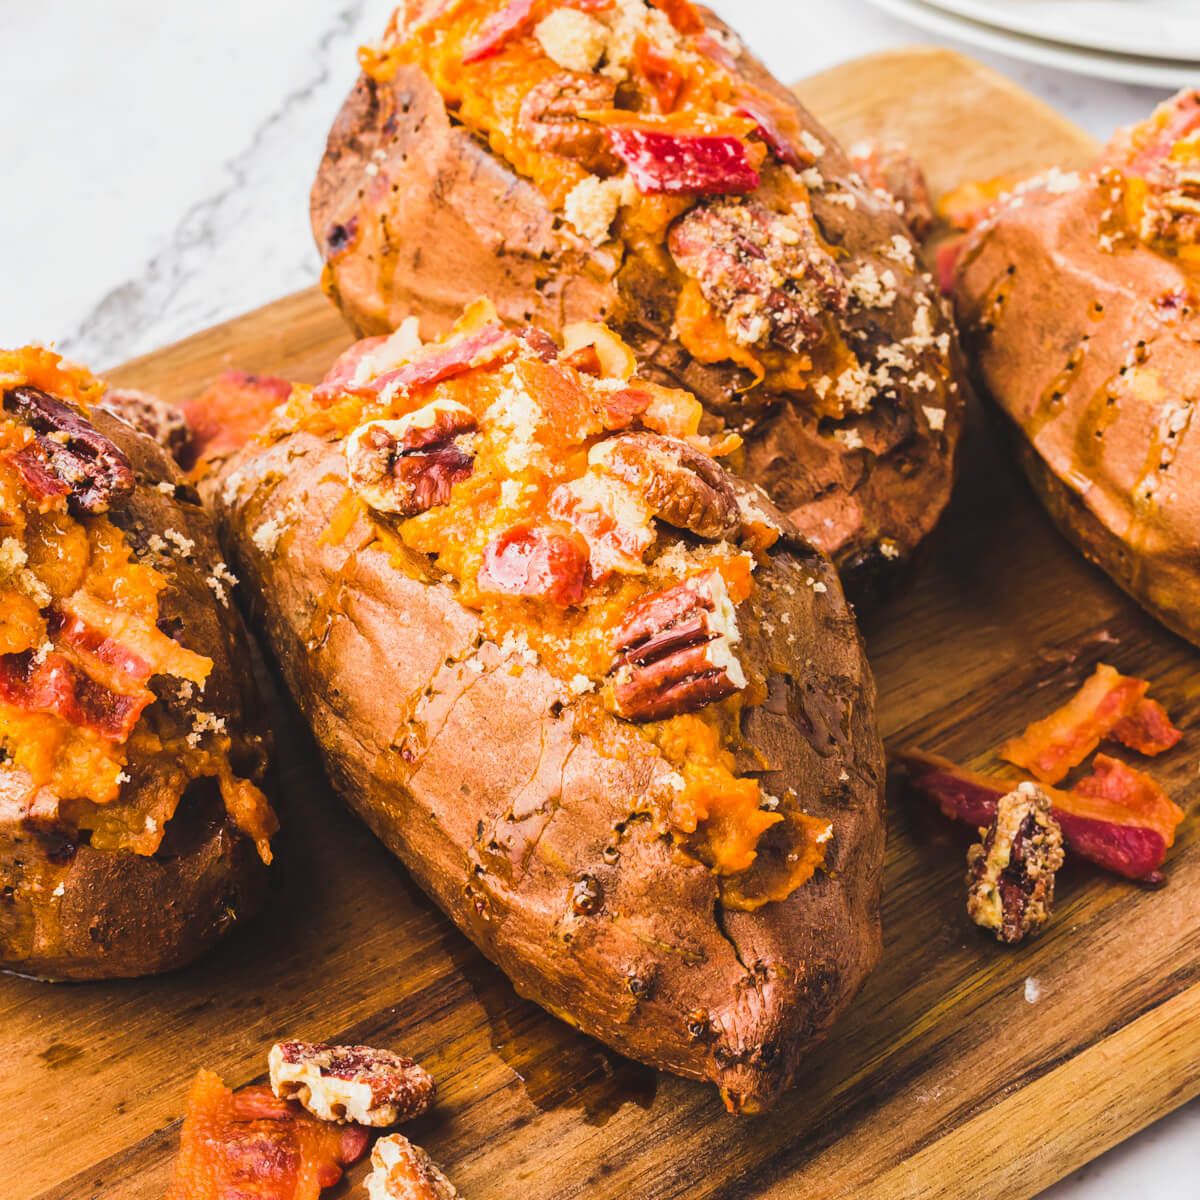 Four Twice Baked Sweet Potatoes topped with crispy bacon and pecans on a wooden serving board.